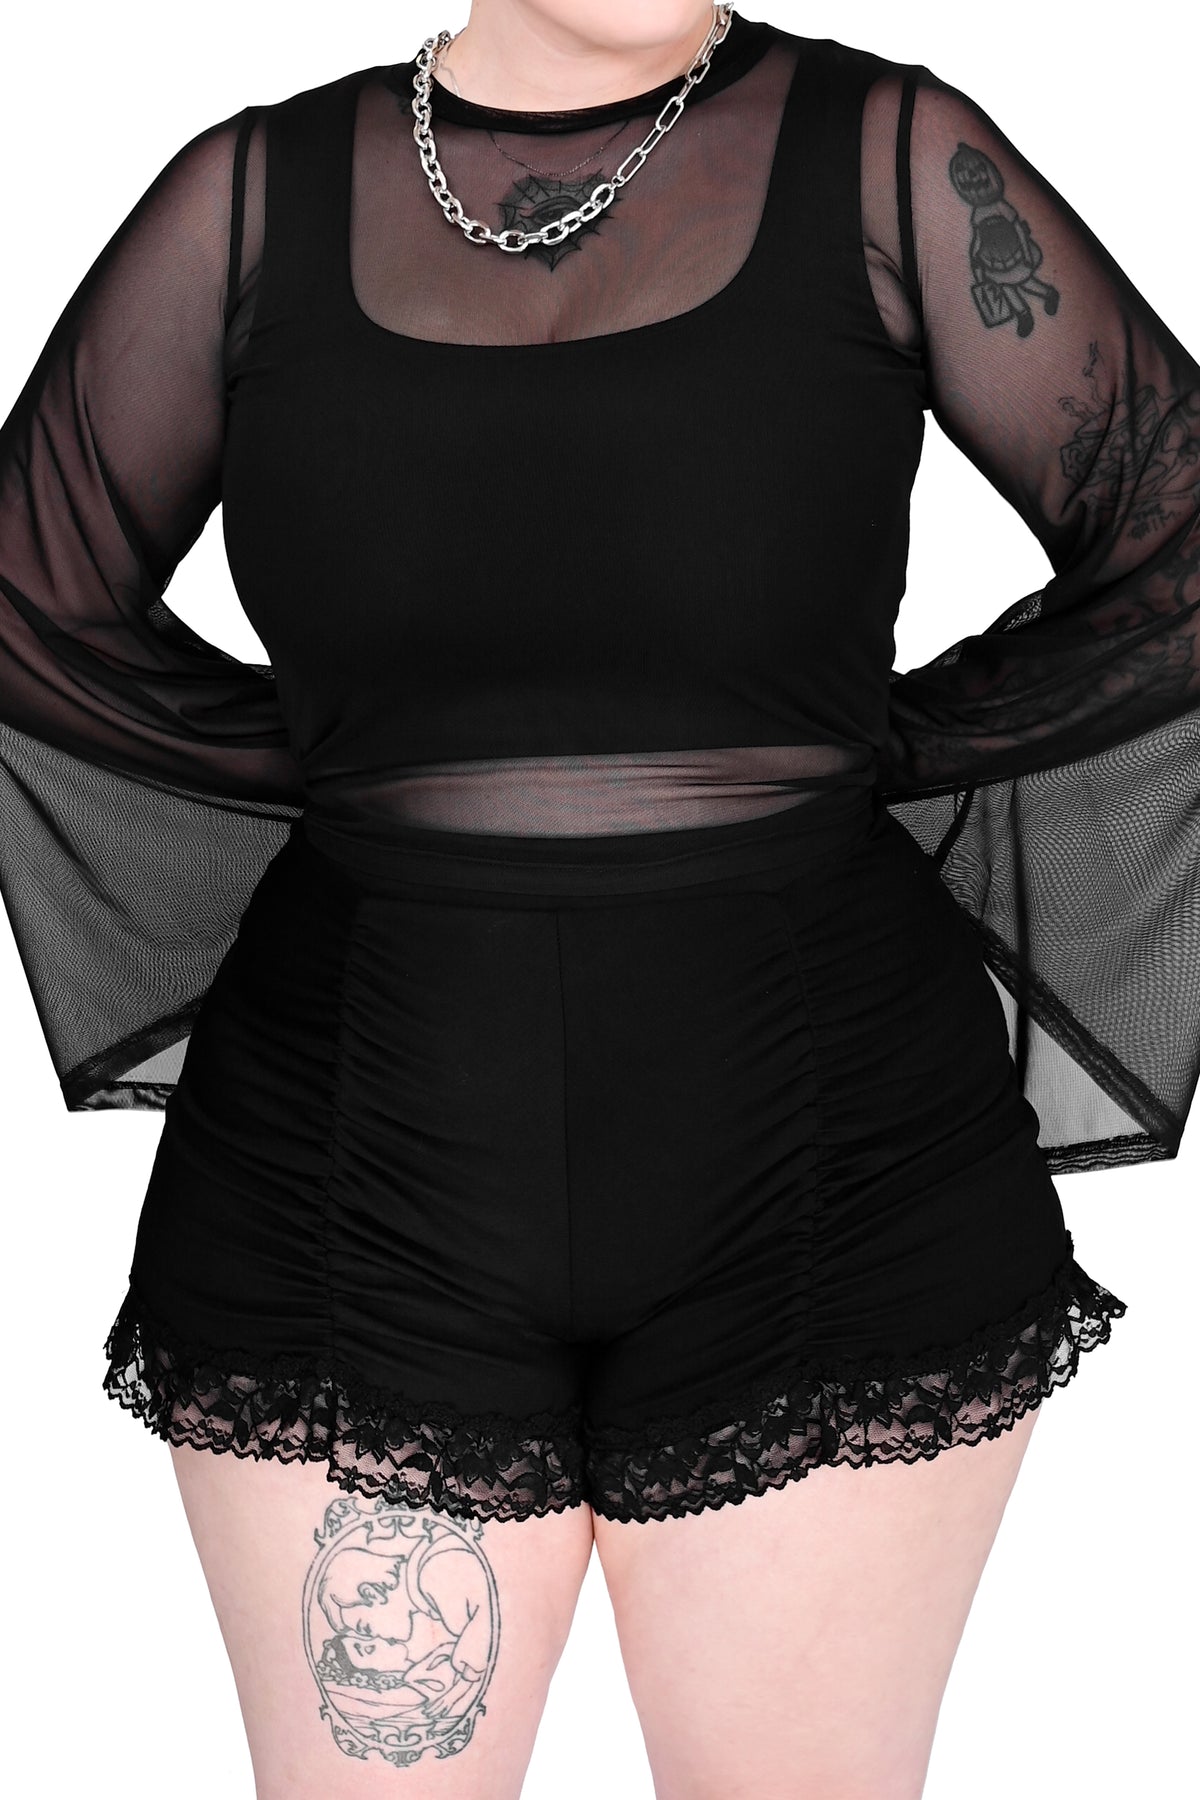 black ruched bloomer shorts with lace bottom hem